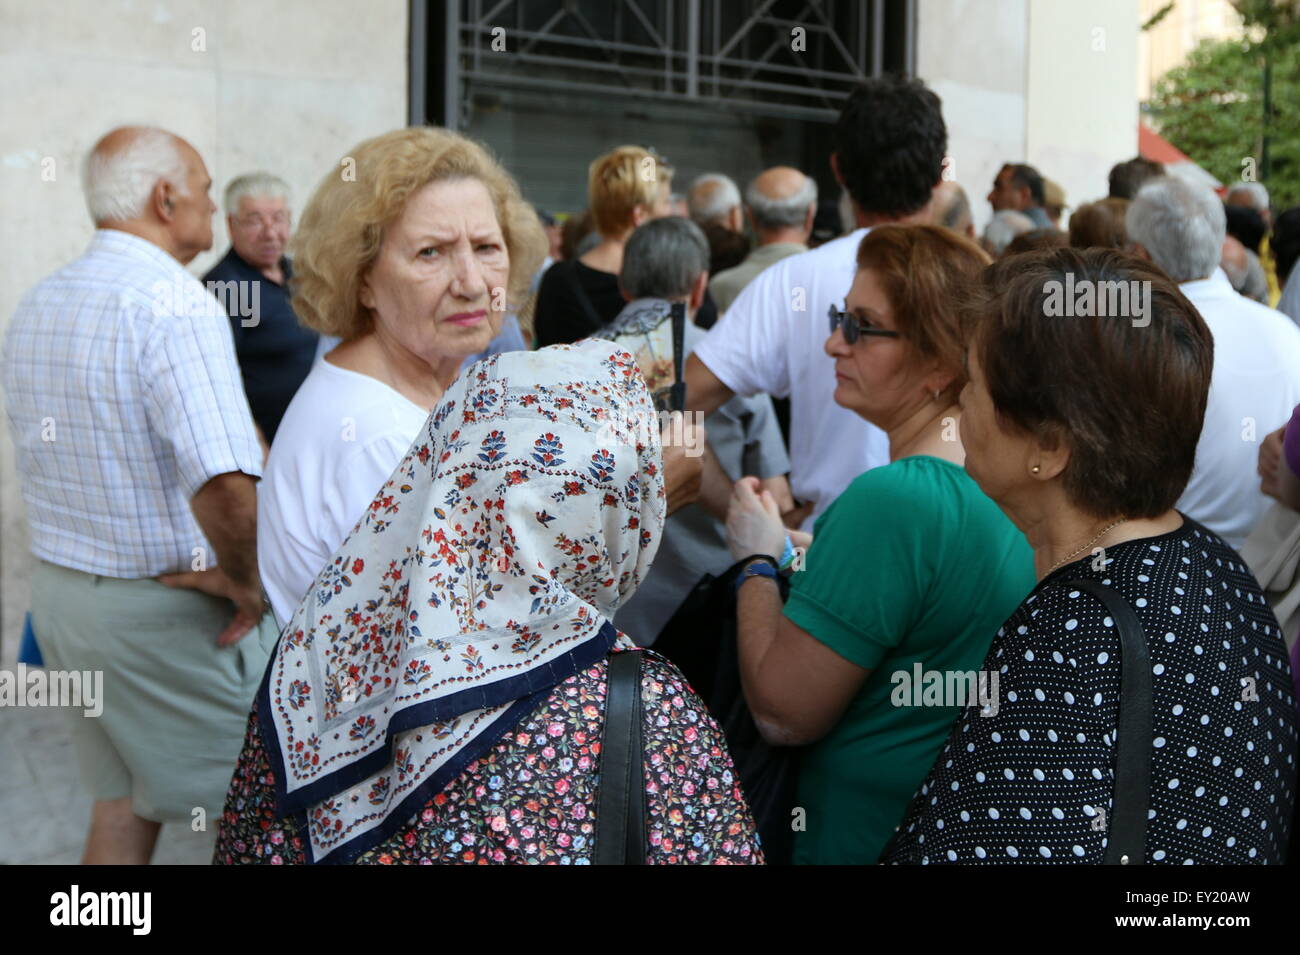 Thessaloniki, Greece. 20th July, 2015. Customers queue outside a National Bank branch in Thessaloniki, Greece's second city as banks reopened for the first time in three weeks. Capitals controls remain in place, and withdrawals are restricted, although the daily limit becomes weekly and is capped at 420 euros.  Credit:  Orhan Tsolak/Alamy Live News Stock Photo